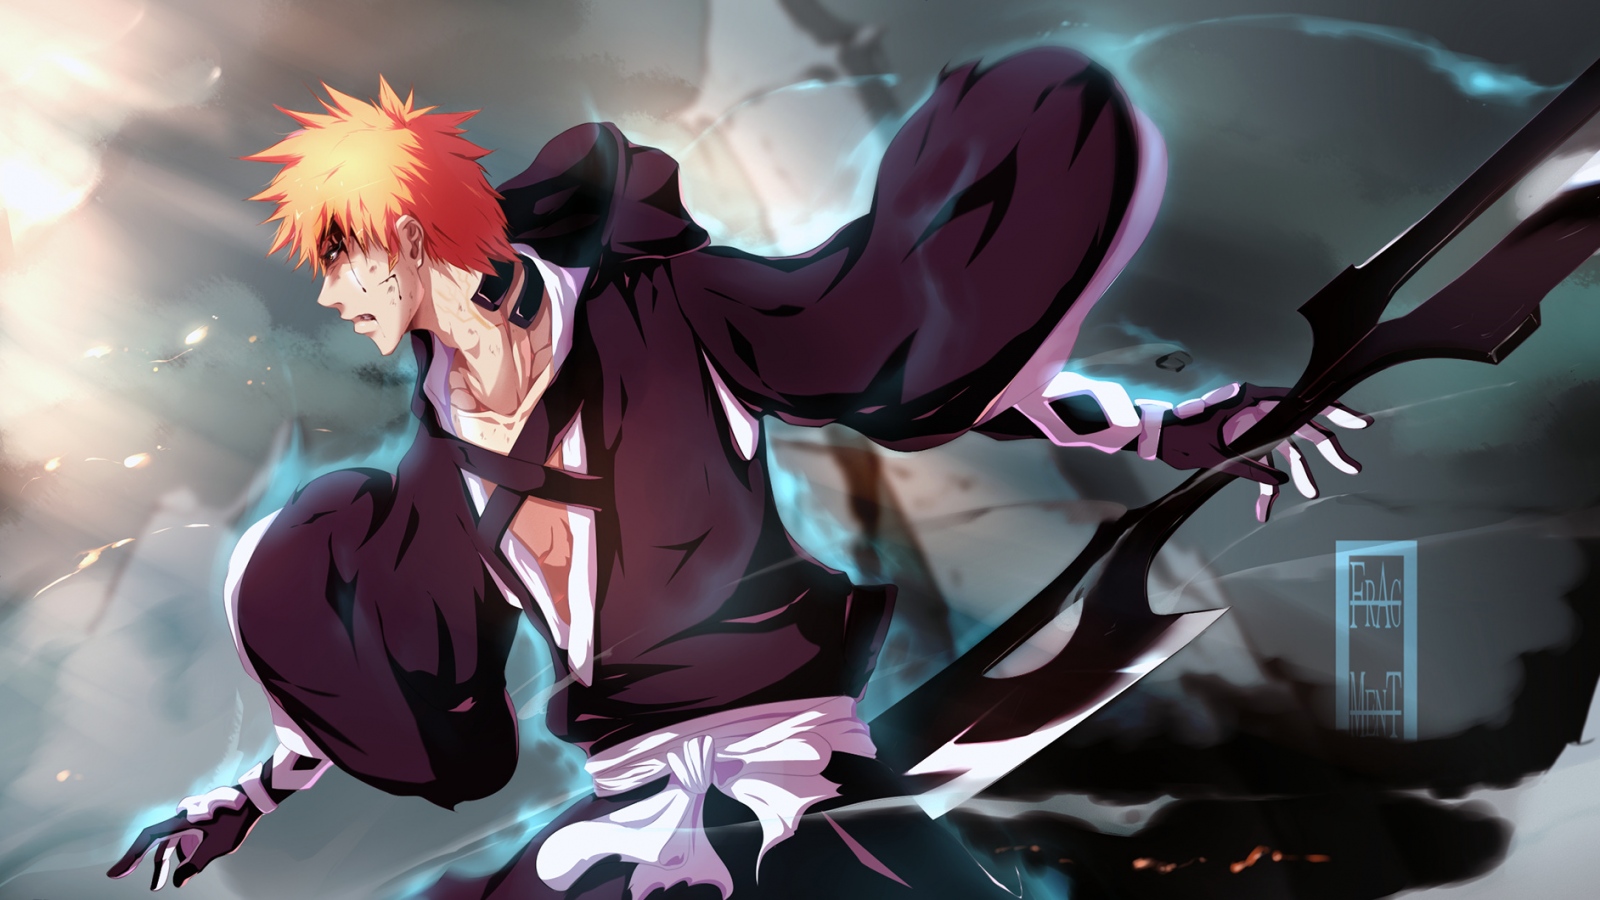 Fans are Angry over No Response on Bleach Future from Makers